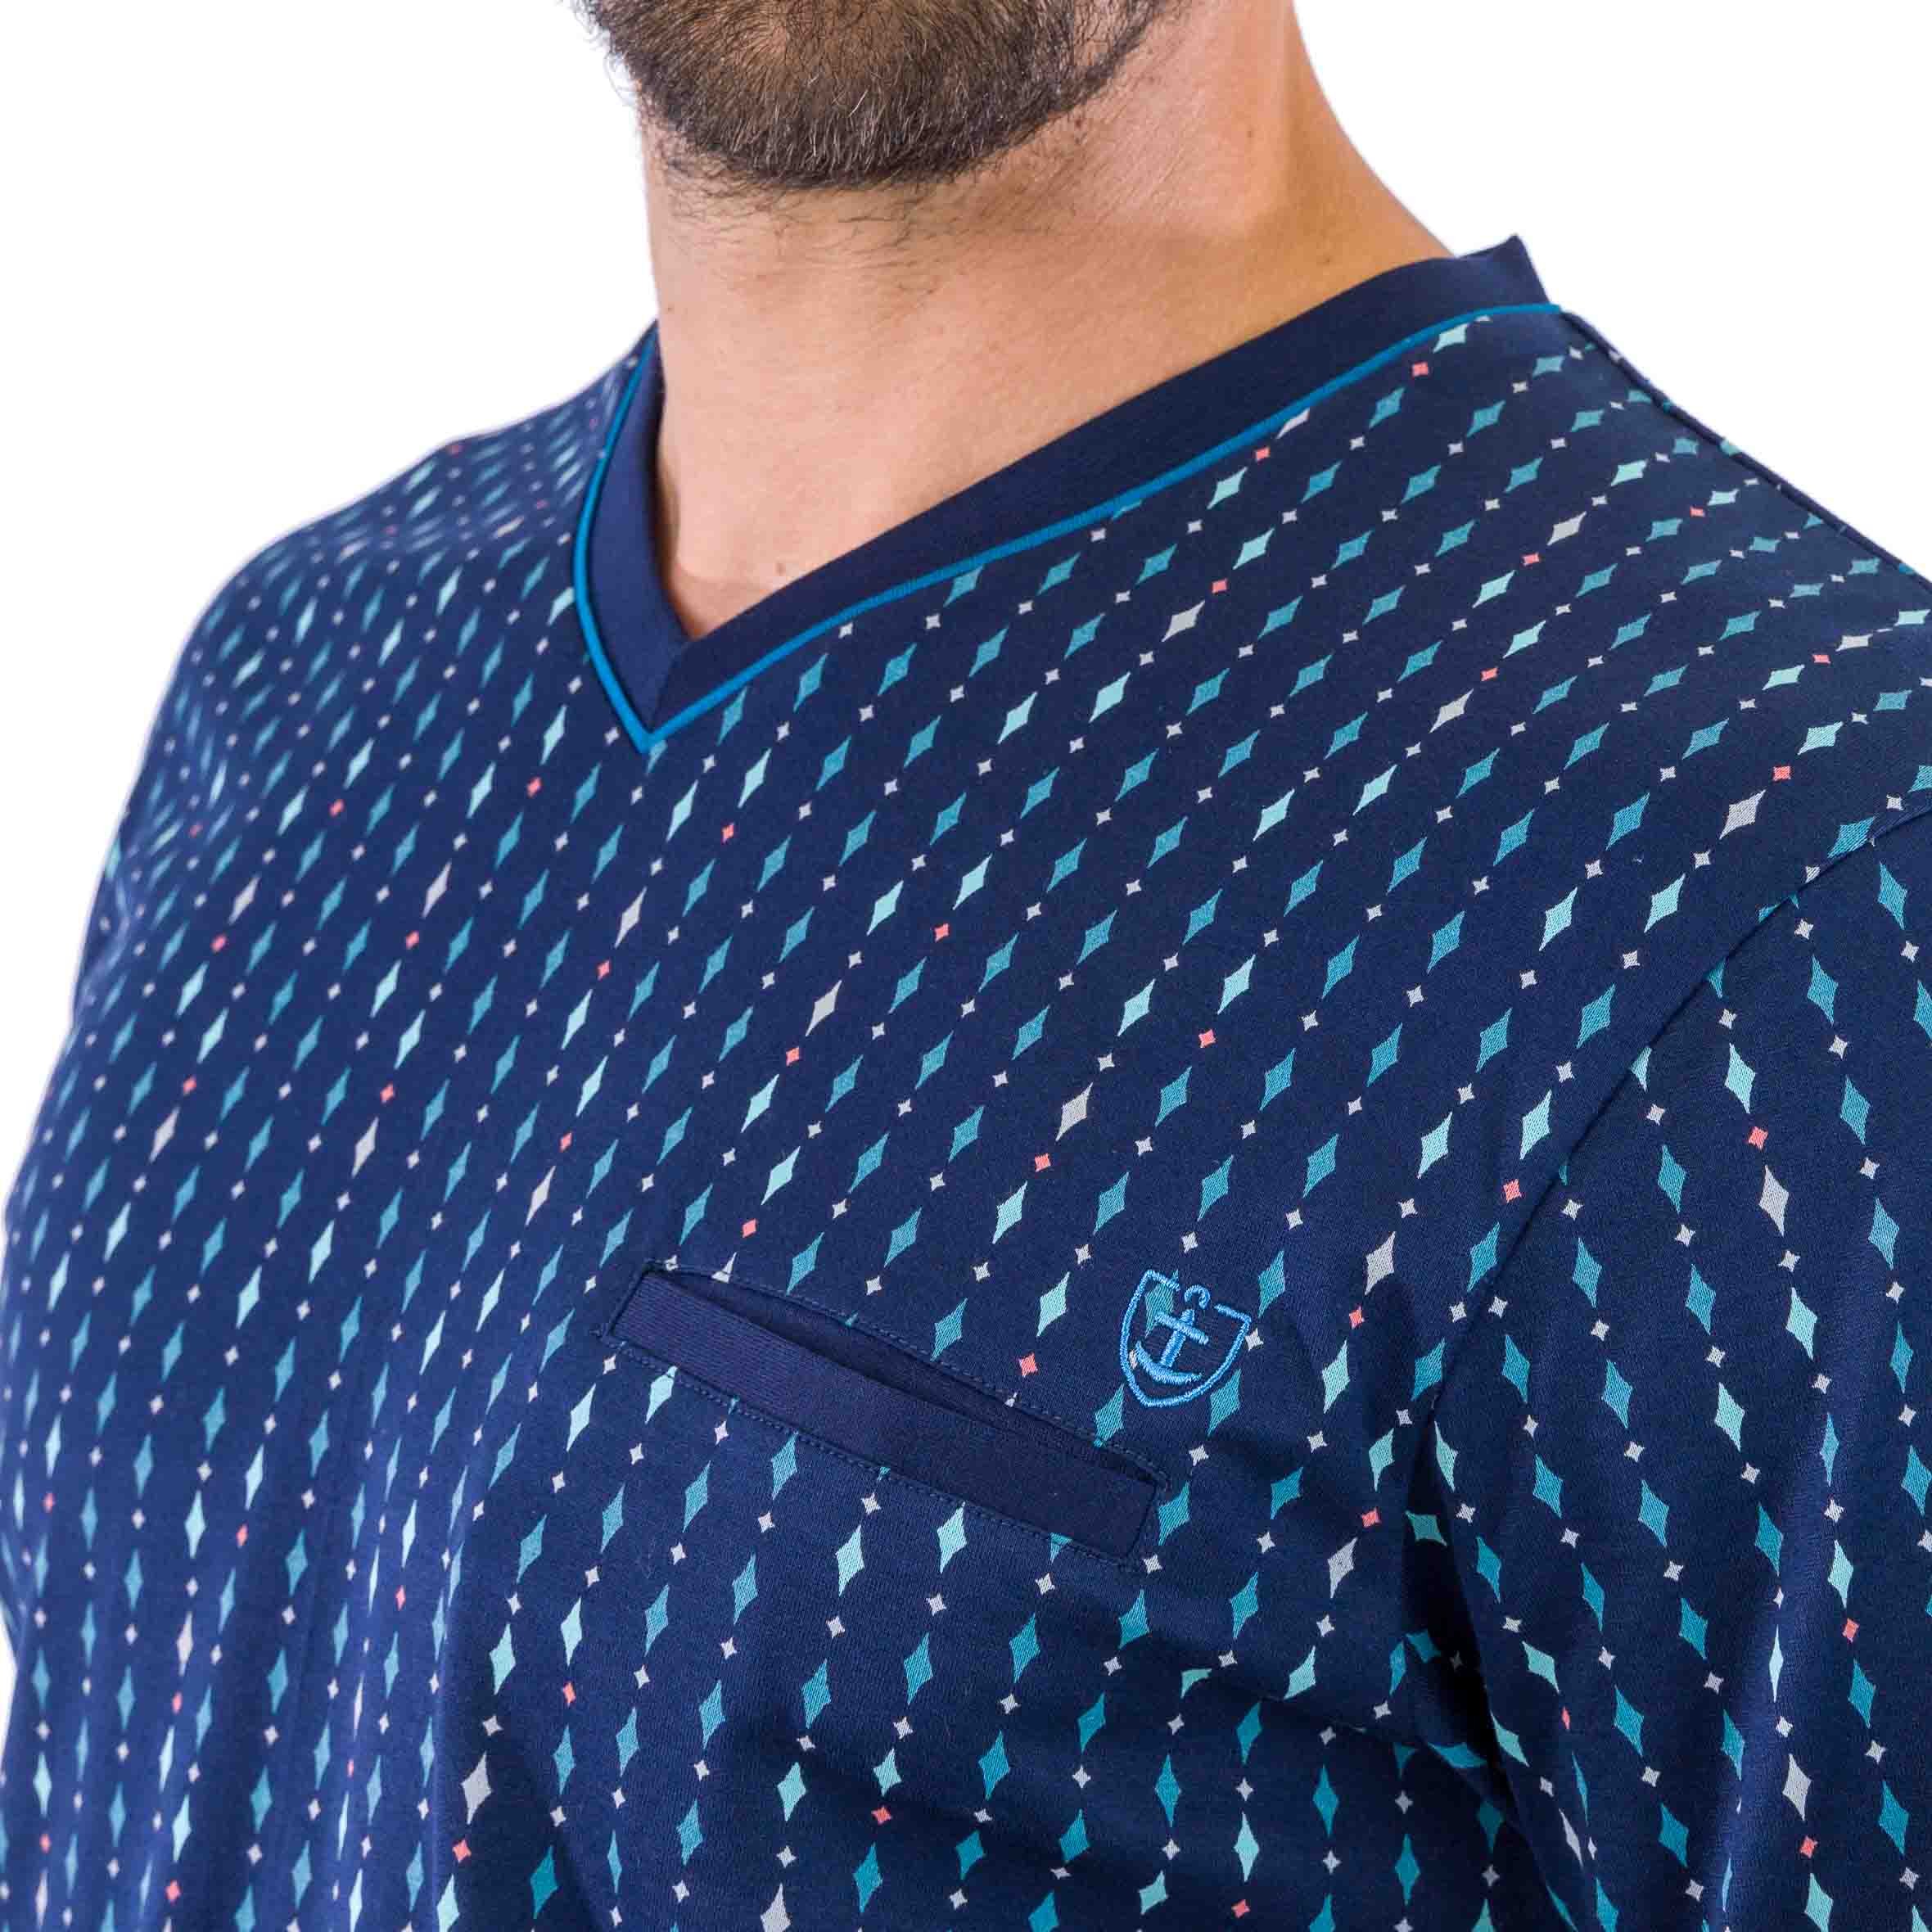 V-Neck Pajamas in Navy Printed Mercerized Cotton Jersey with Stripe Effect